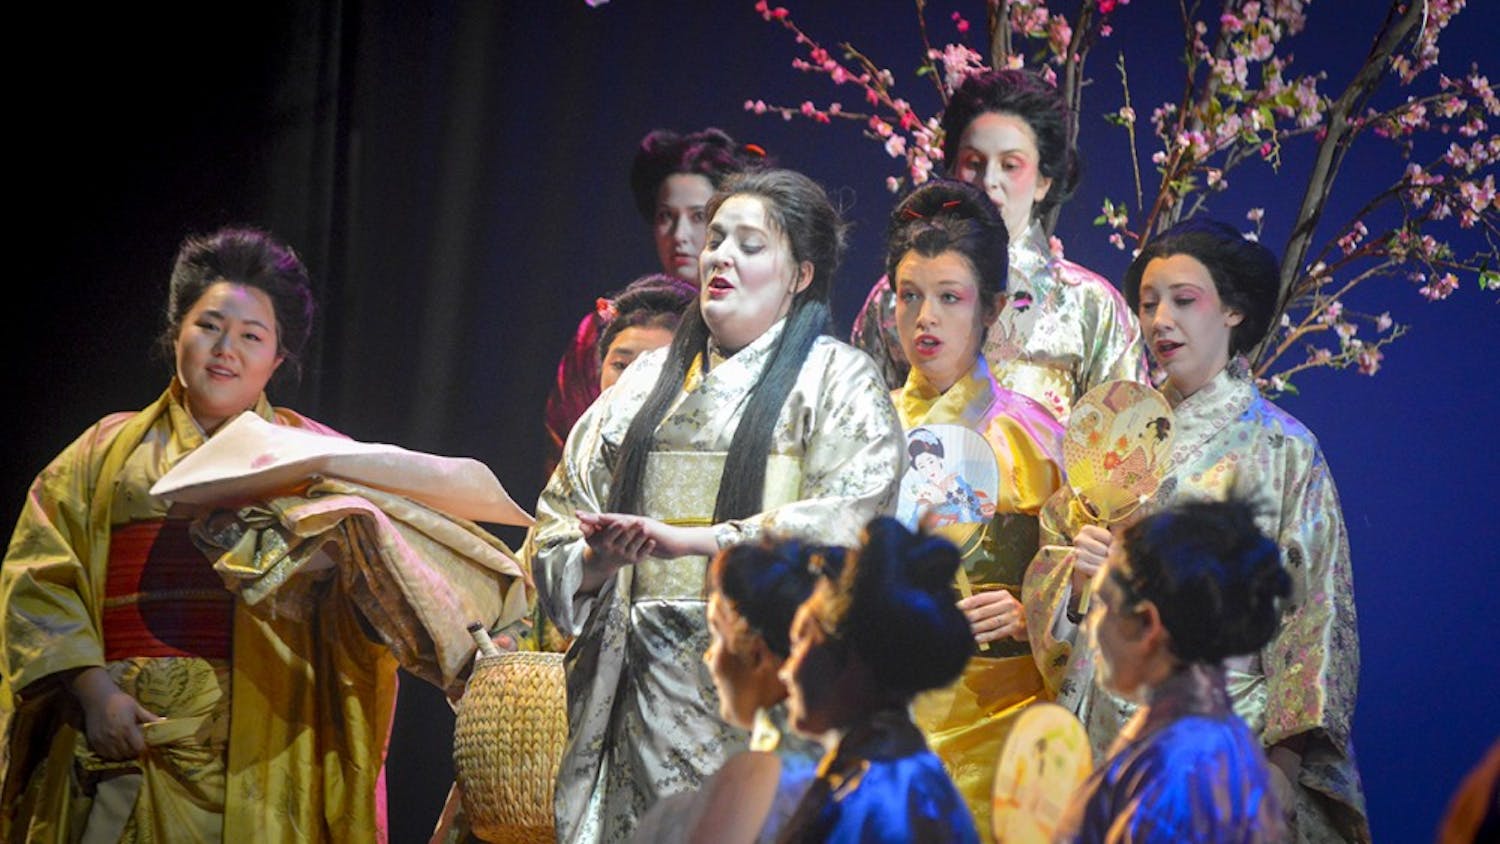 The IU Opera presents Giacomo Puccini's "Madama Butterfly" in a dress rehersal Tuesday evening in the Musical Arts Center. The italian opera follows the tragic love story of a geisha who must fight for her child after her husband returns from the Navy with an American wife.